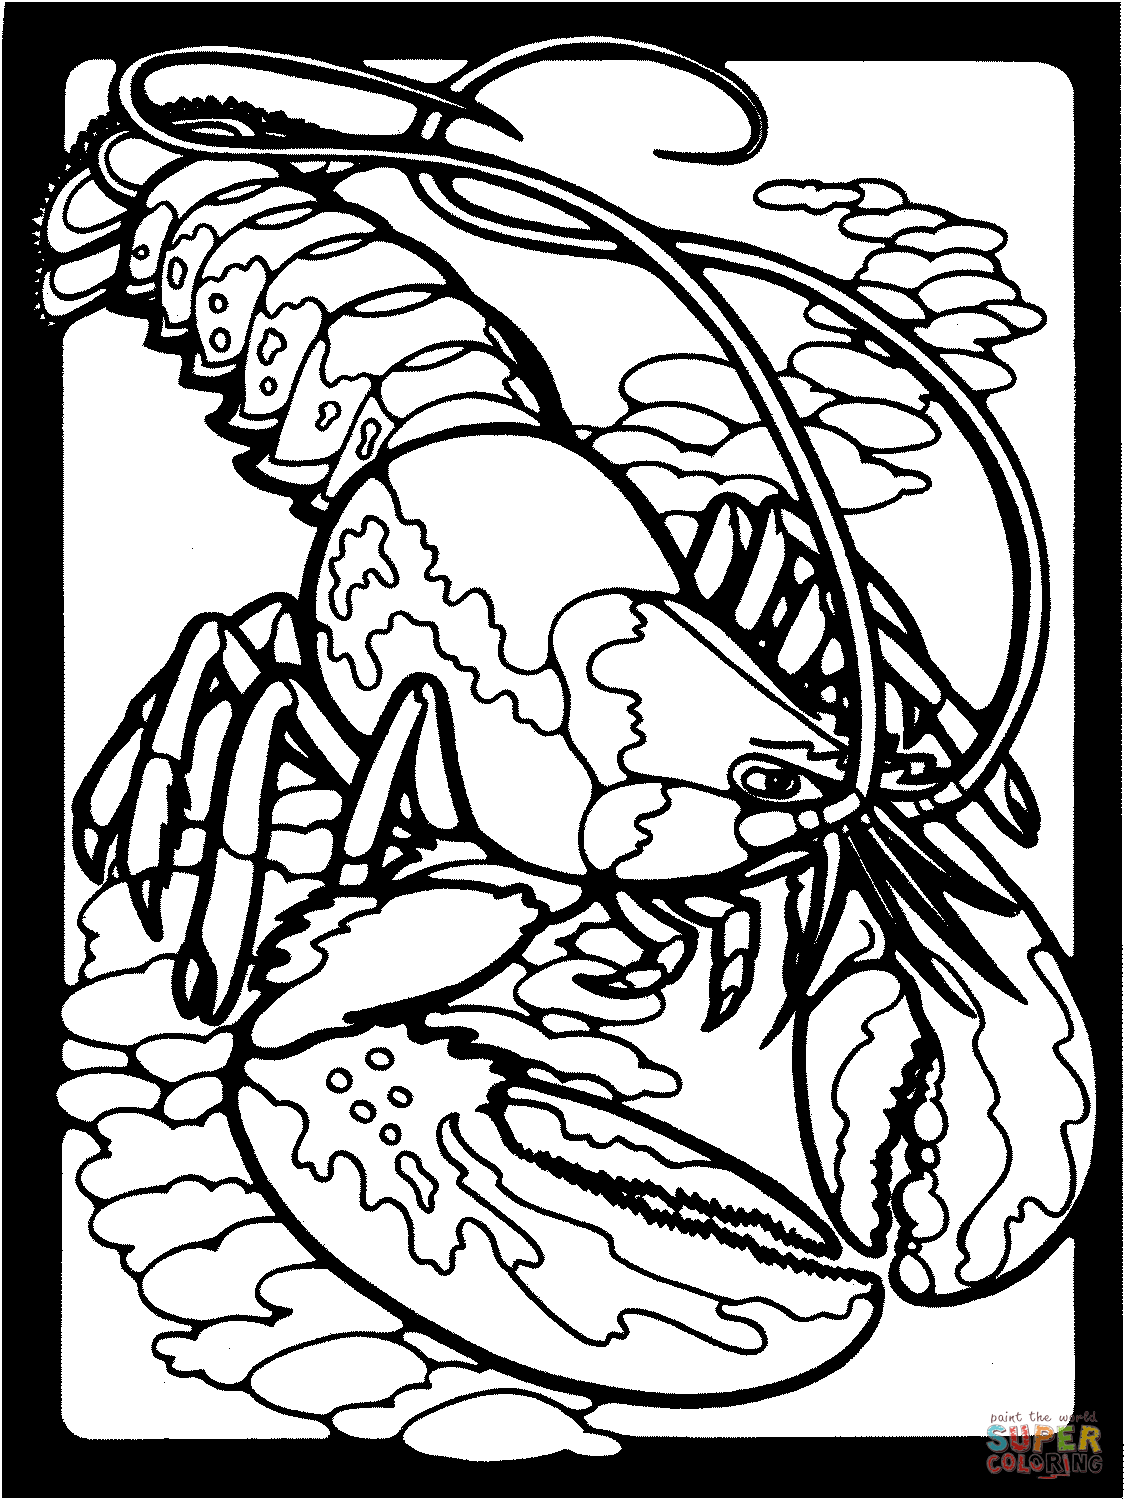 Clawed lobster coloring page free printable coloring pages